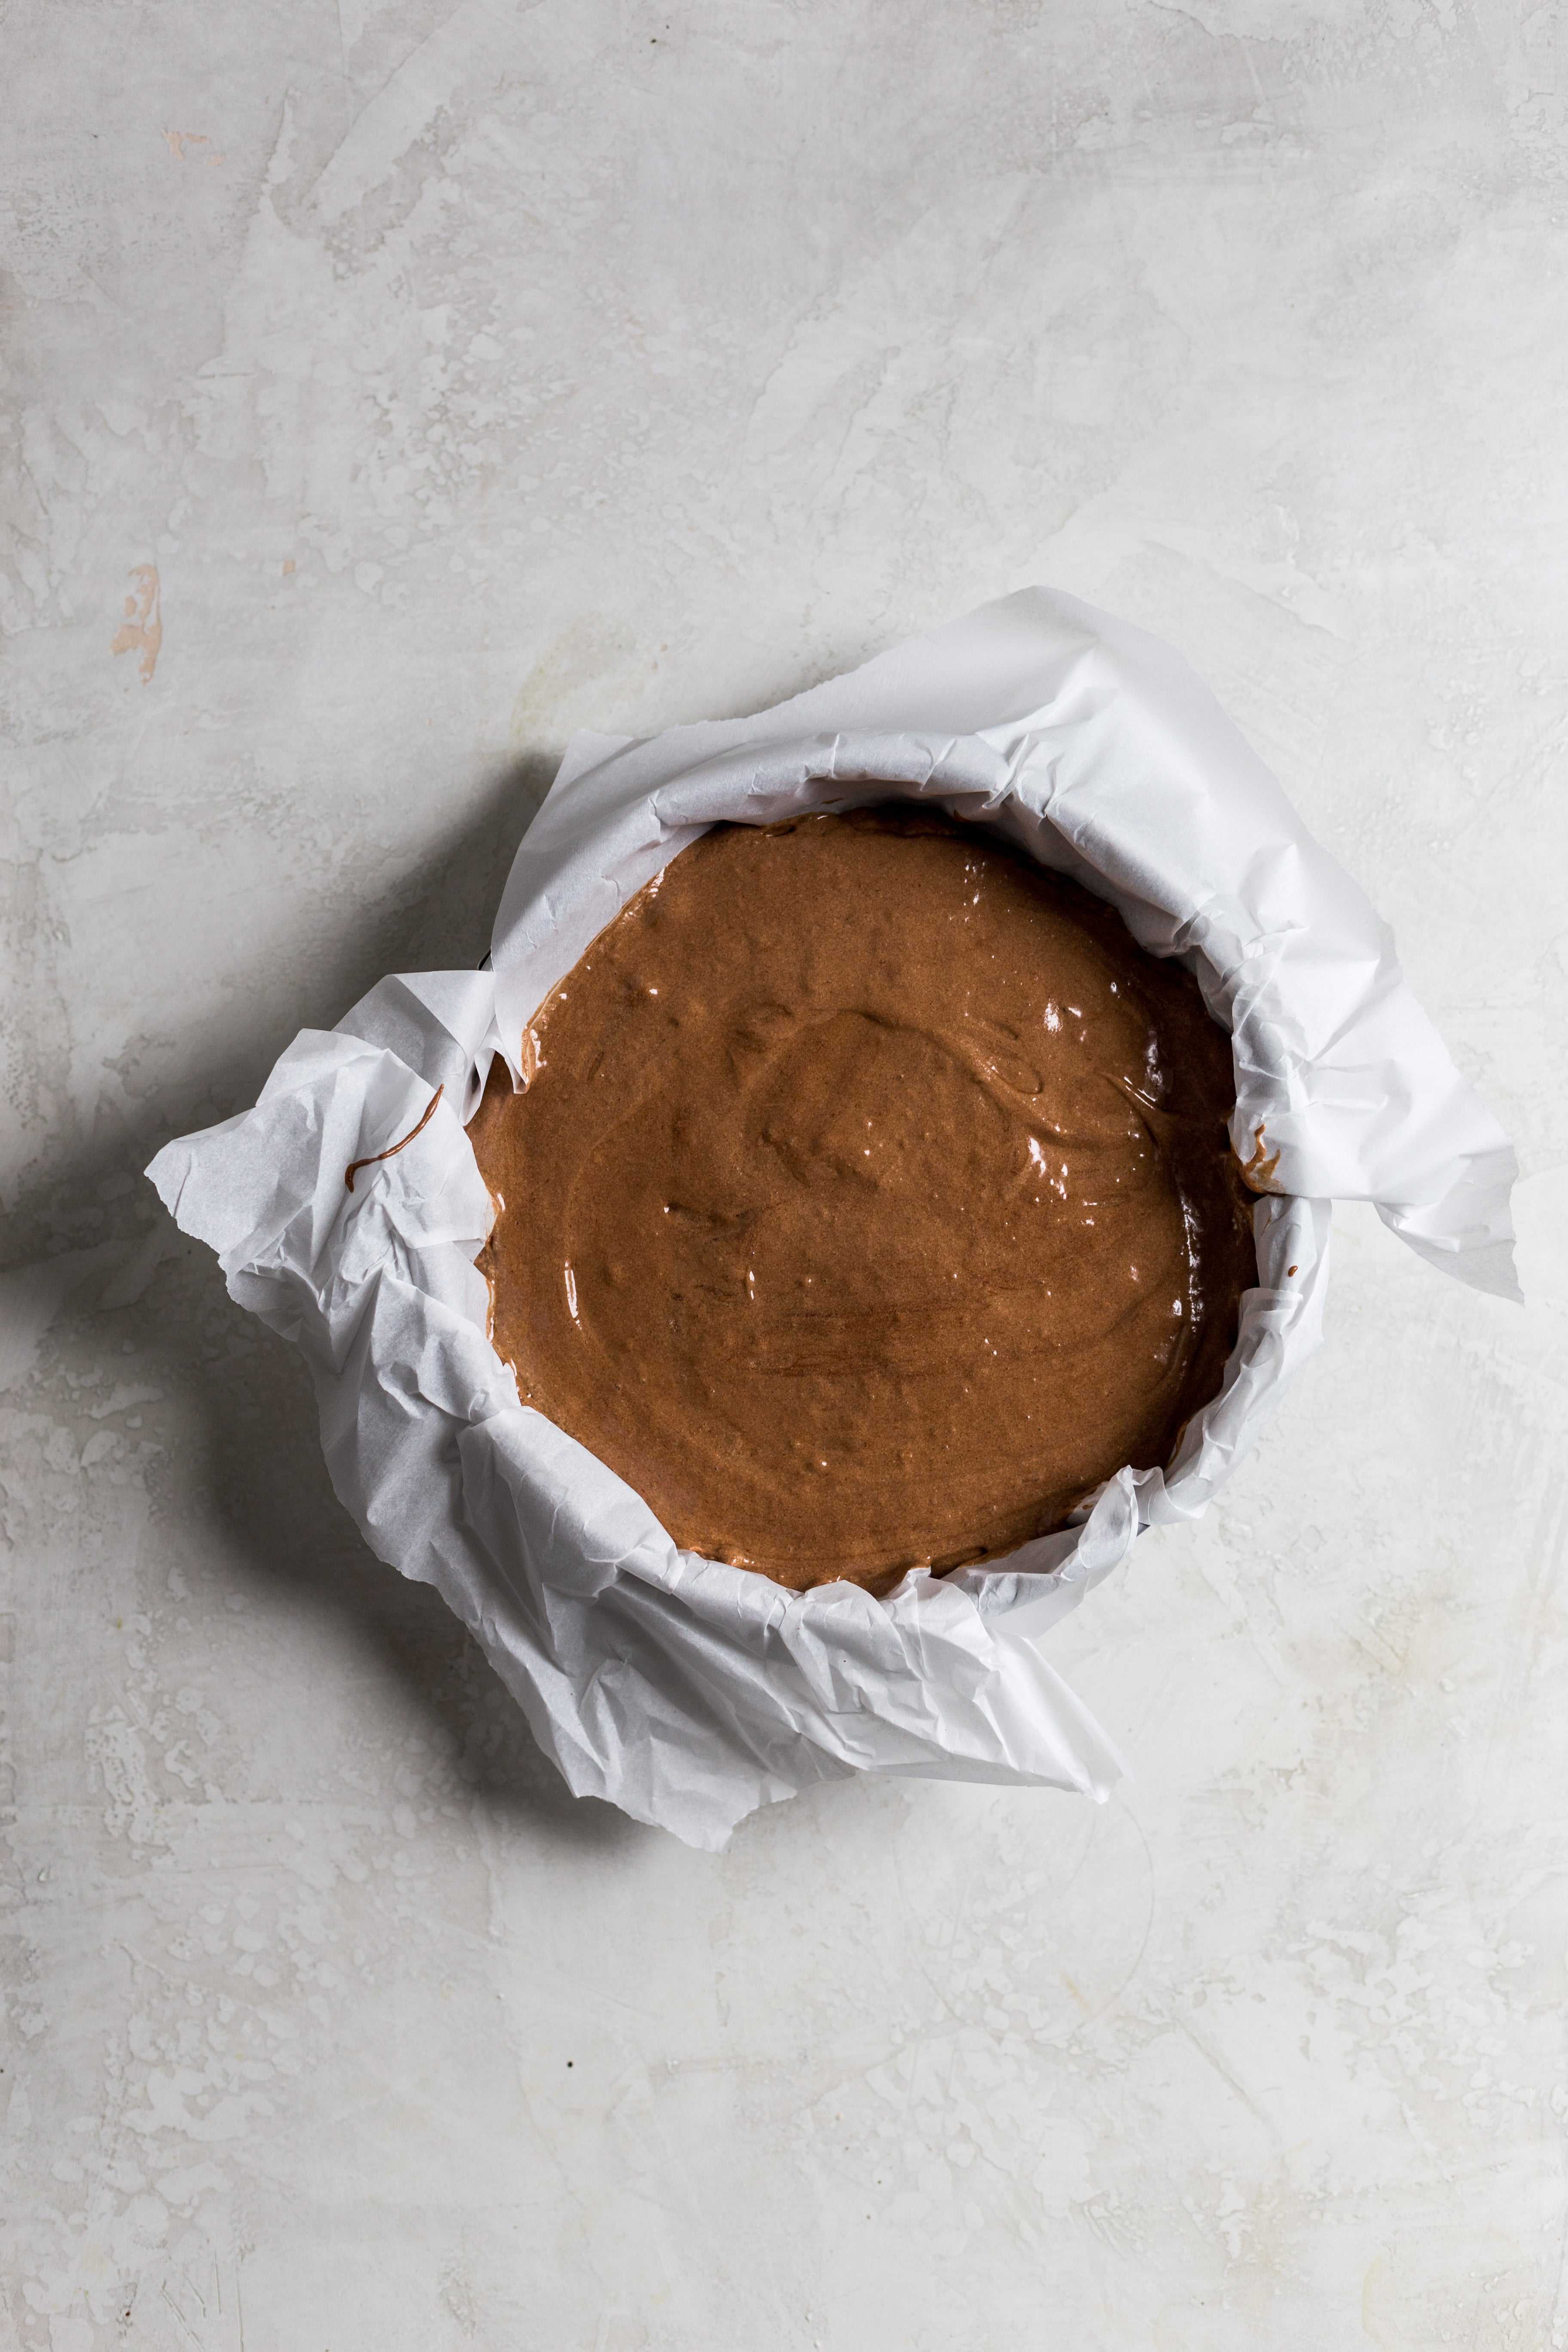 Chocolate cake batter in a parchment paper lined spring form pan